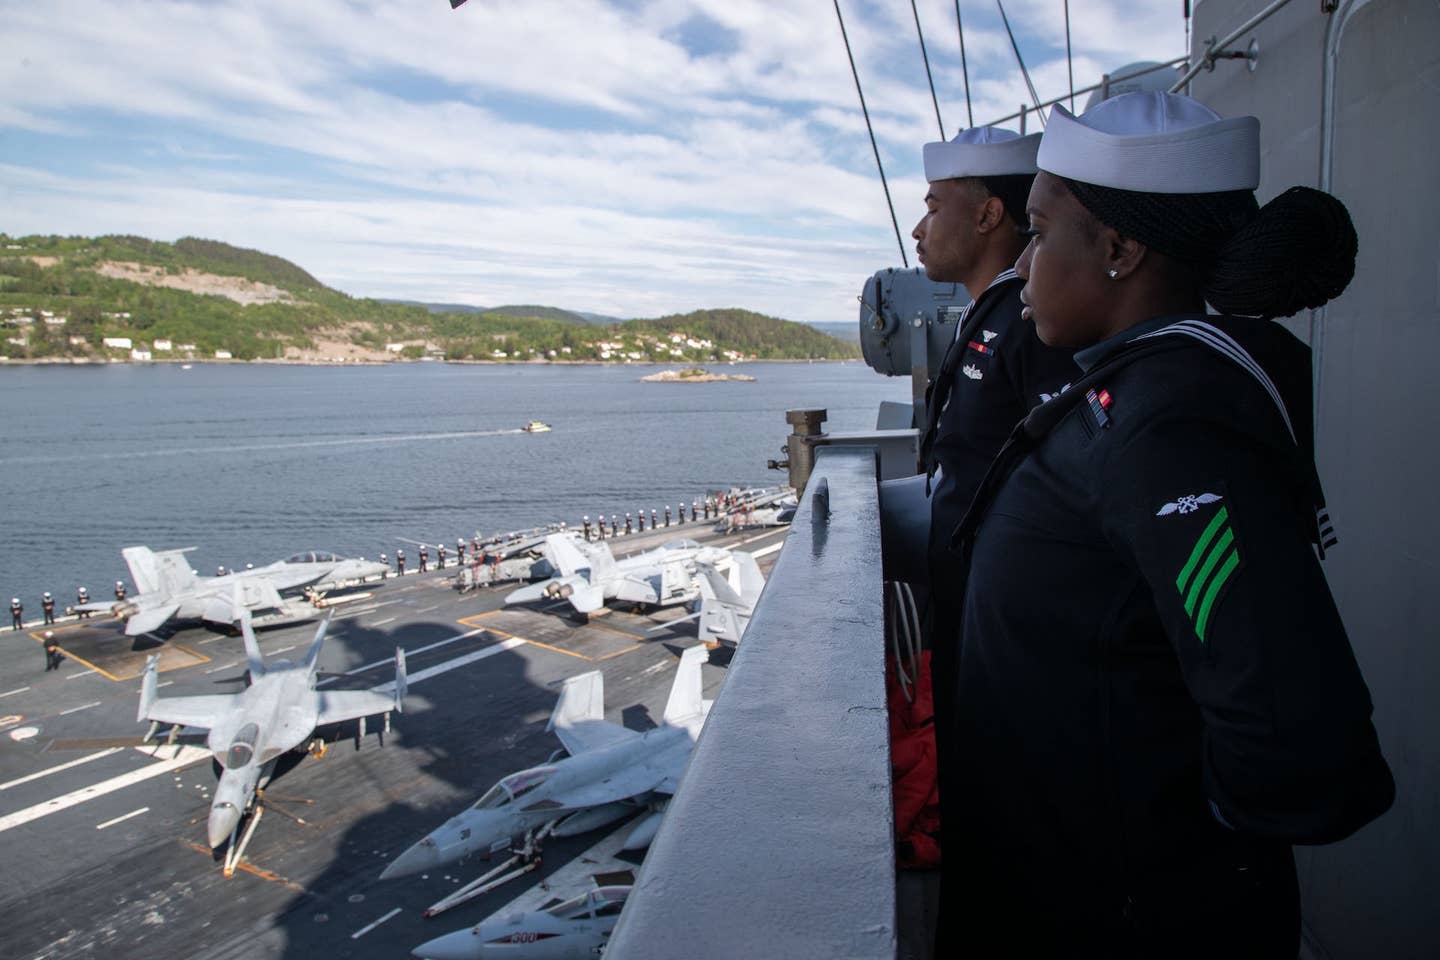 USS <em>Gerald R. Ford</em> (CVN 78) transits the Oslo fjord for its first port call in Oslo, Norway, May 24, 2023. <em>U.S. Navy Photo by Mass Communication Specialist 2nd Class Brian Glunt</em>